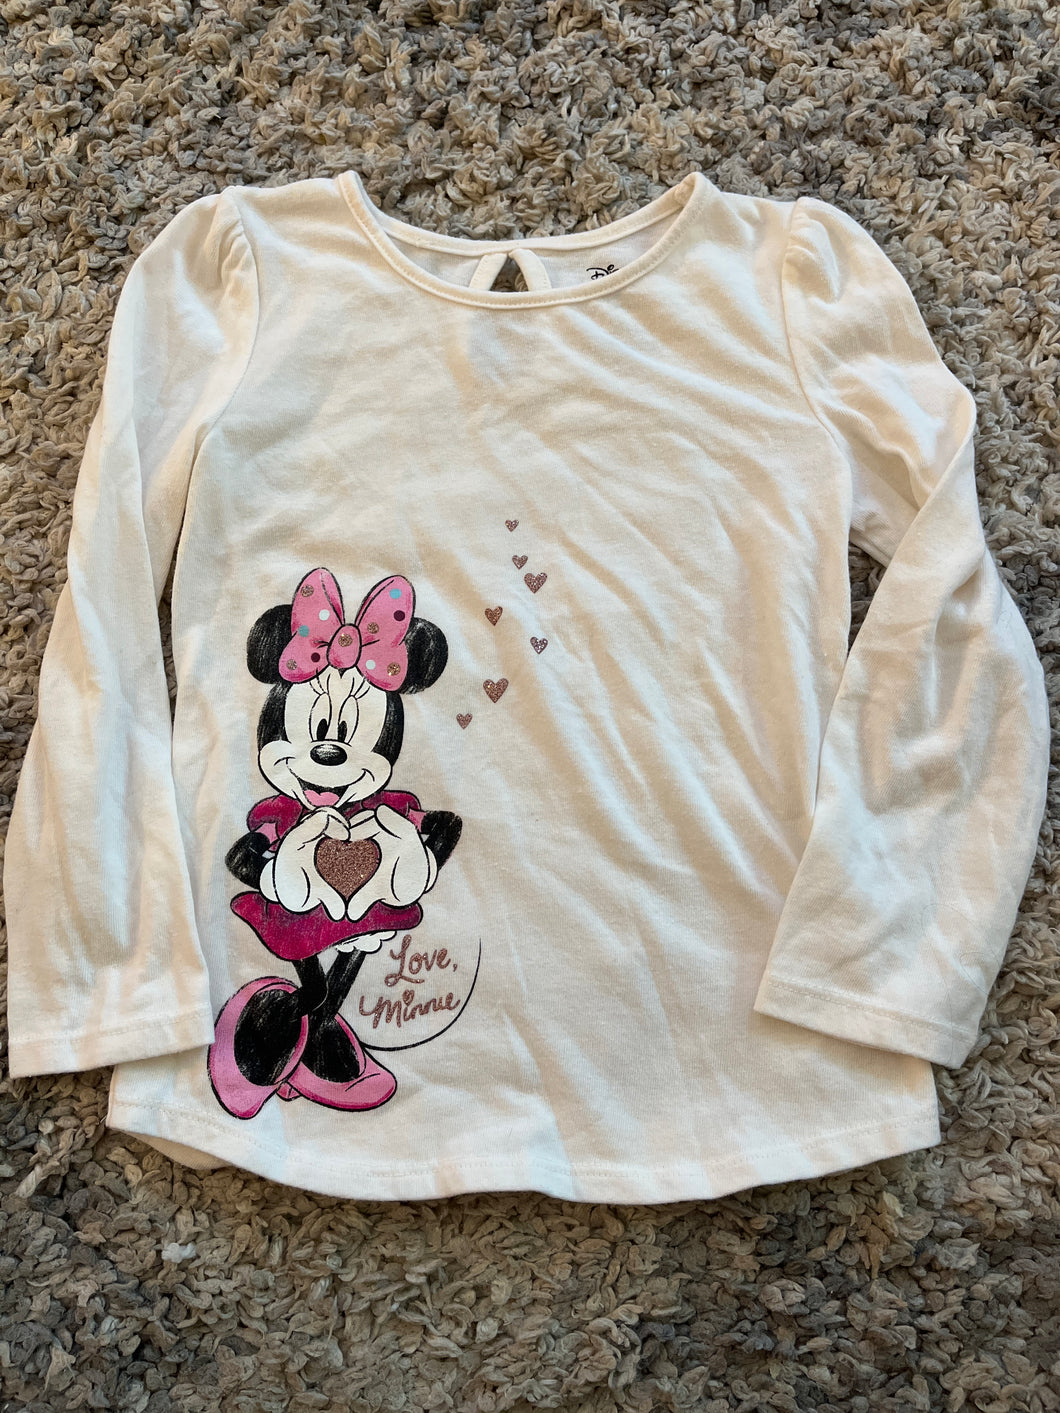 Disney Minnie Mouse white LS with pink Minnie holding gold heart 5